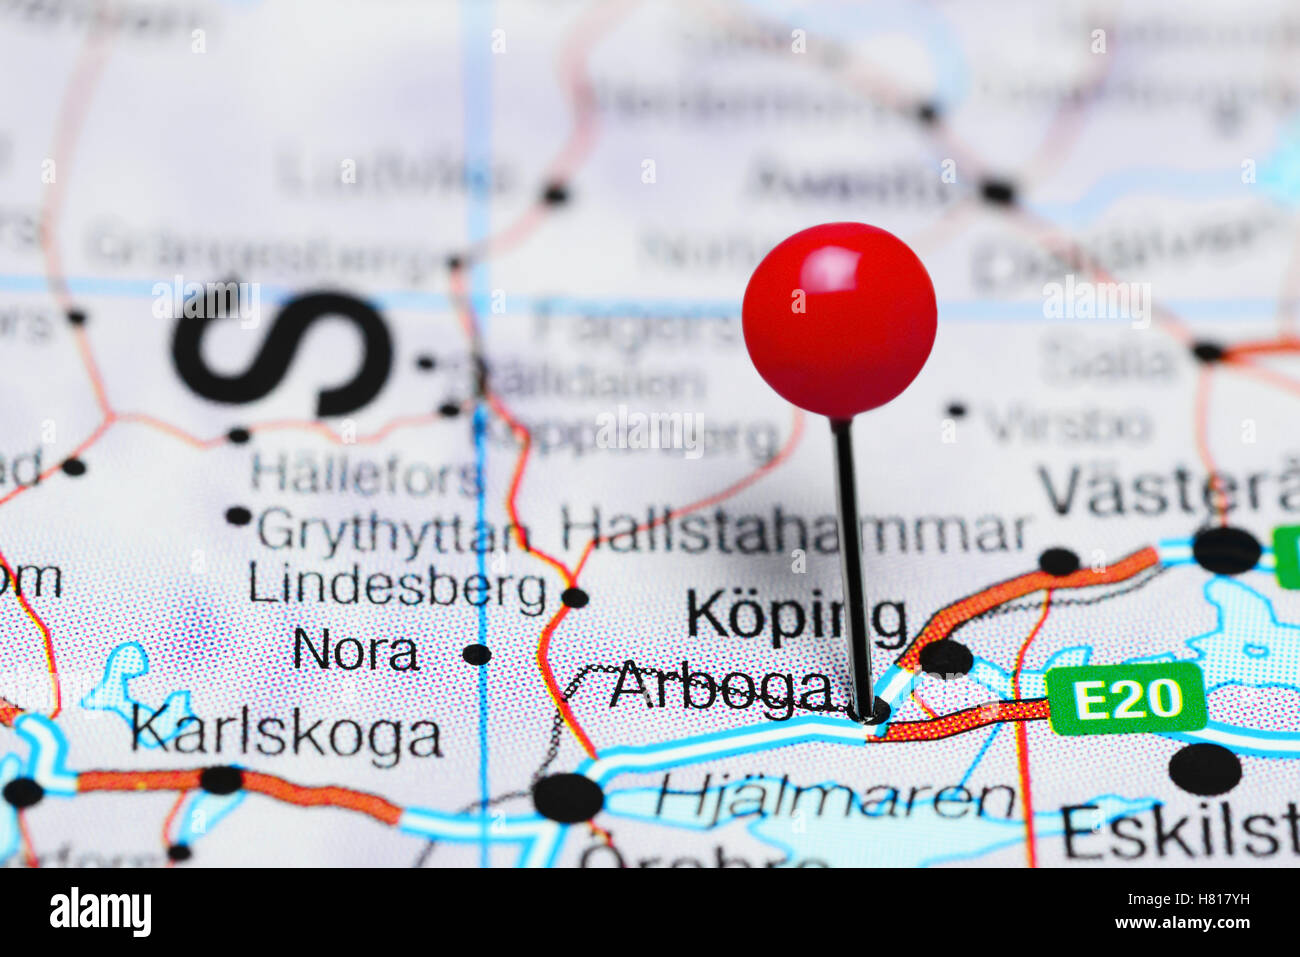 Arboga pinned on a map of Sweden Stock Photo